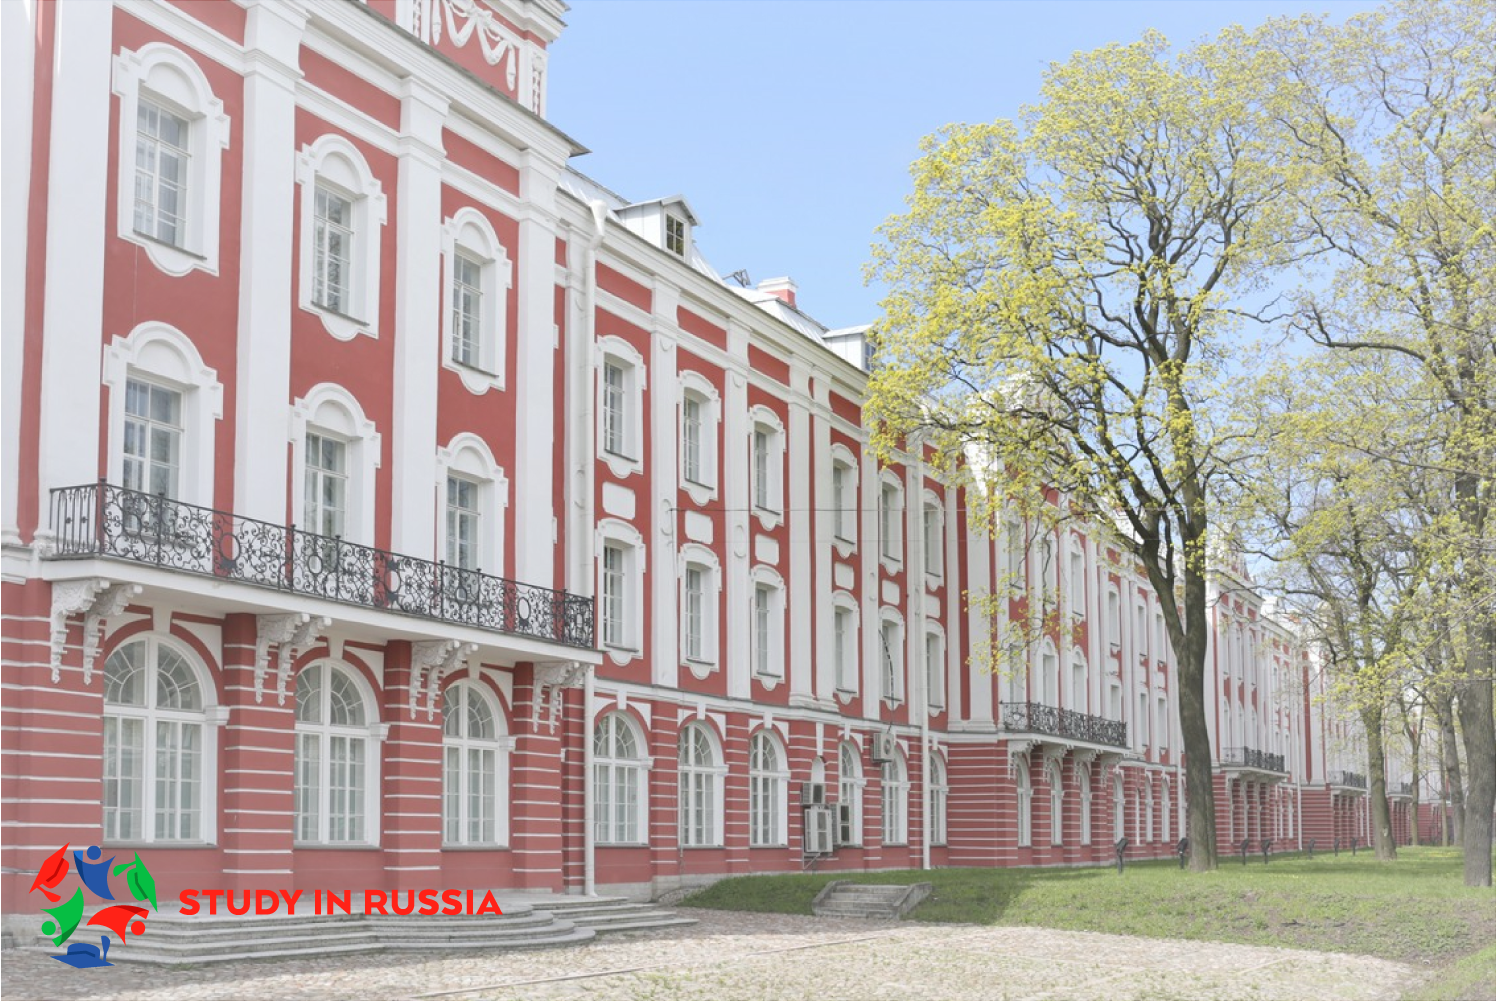 St. Petersburg University invites foreign applicants to learn Russian and prepare for university programmes